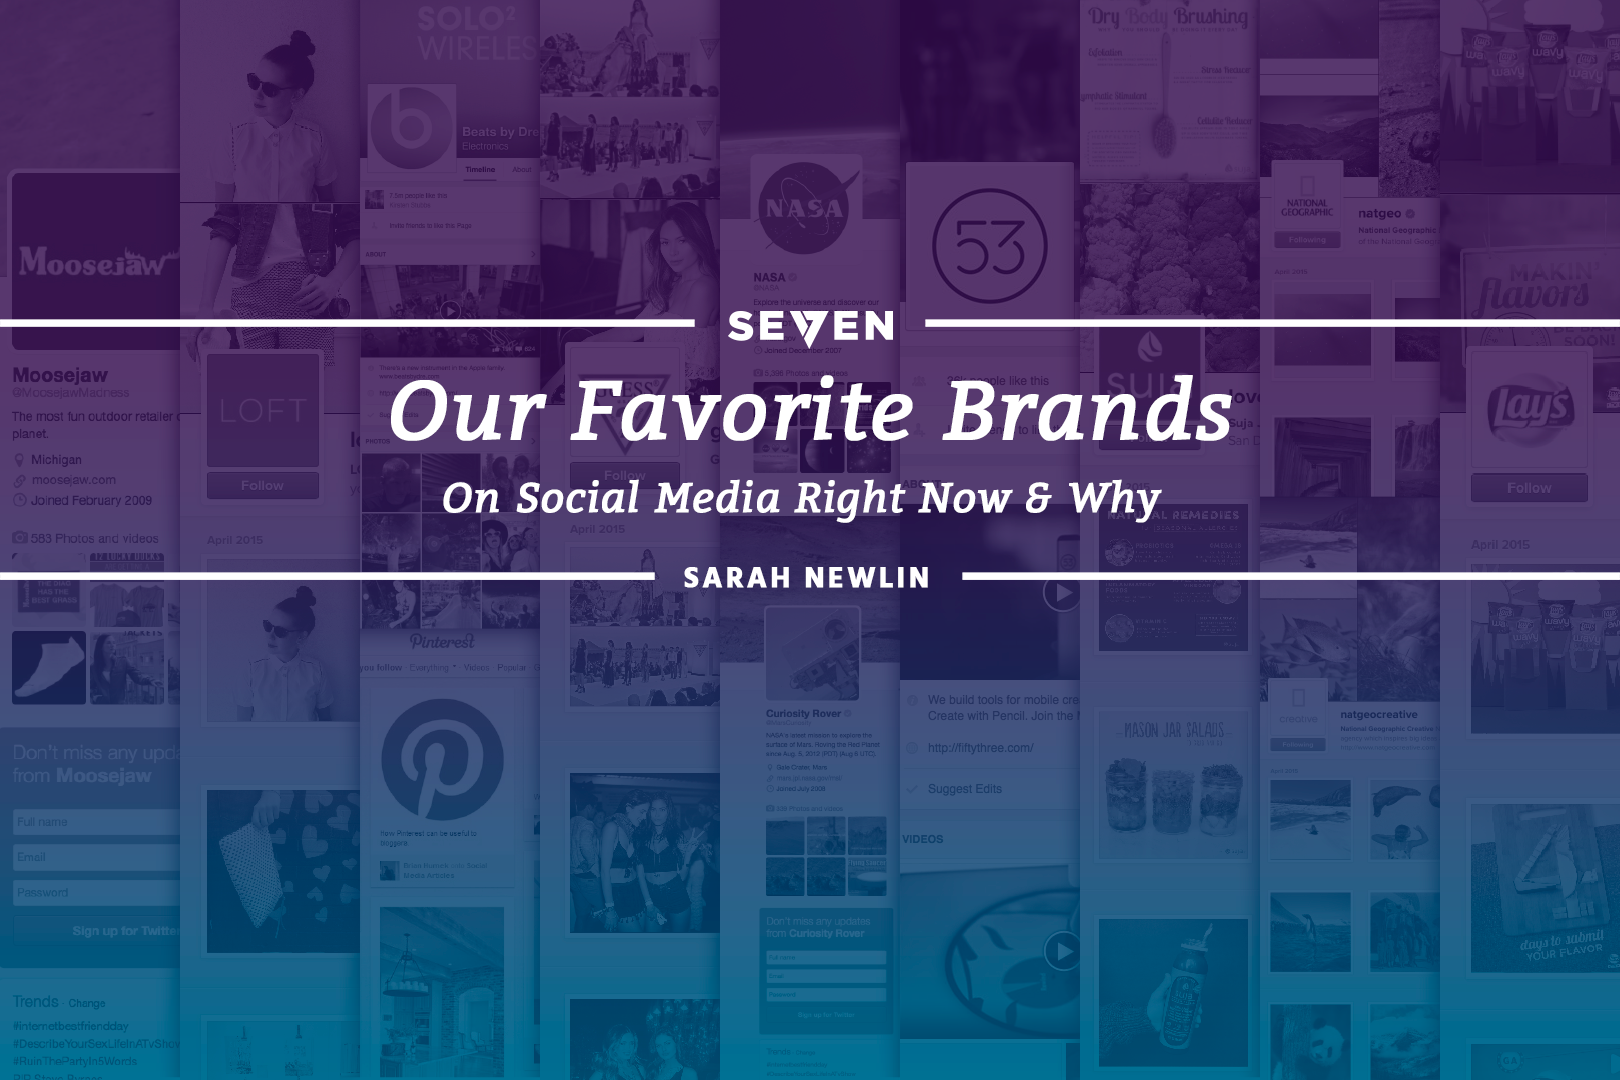 Our Favorite Brands on Social Media Right Now & Why